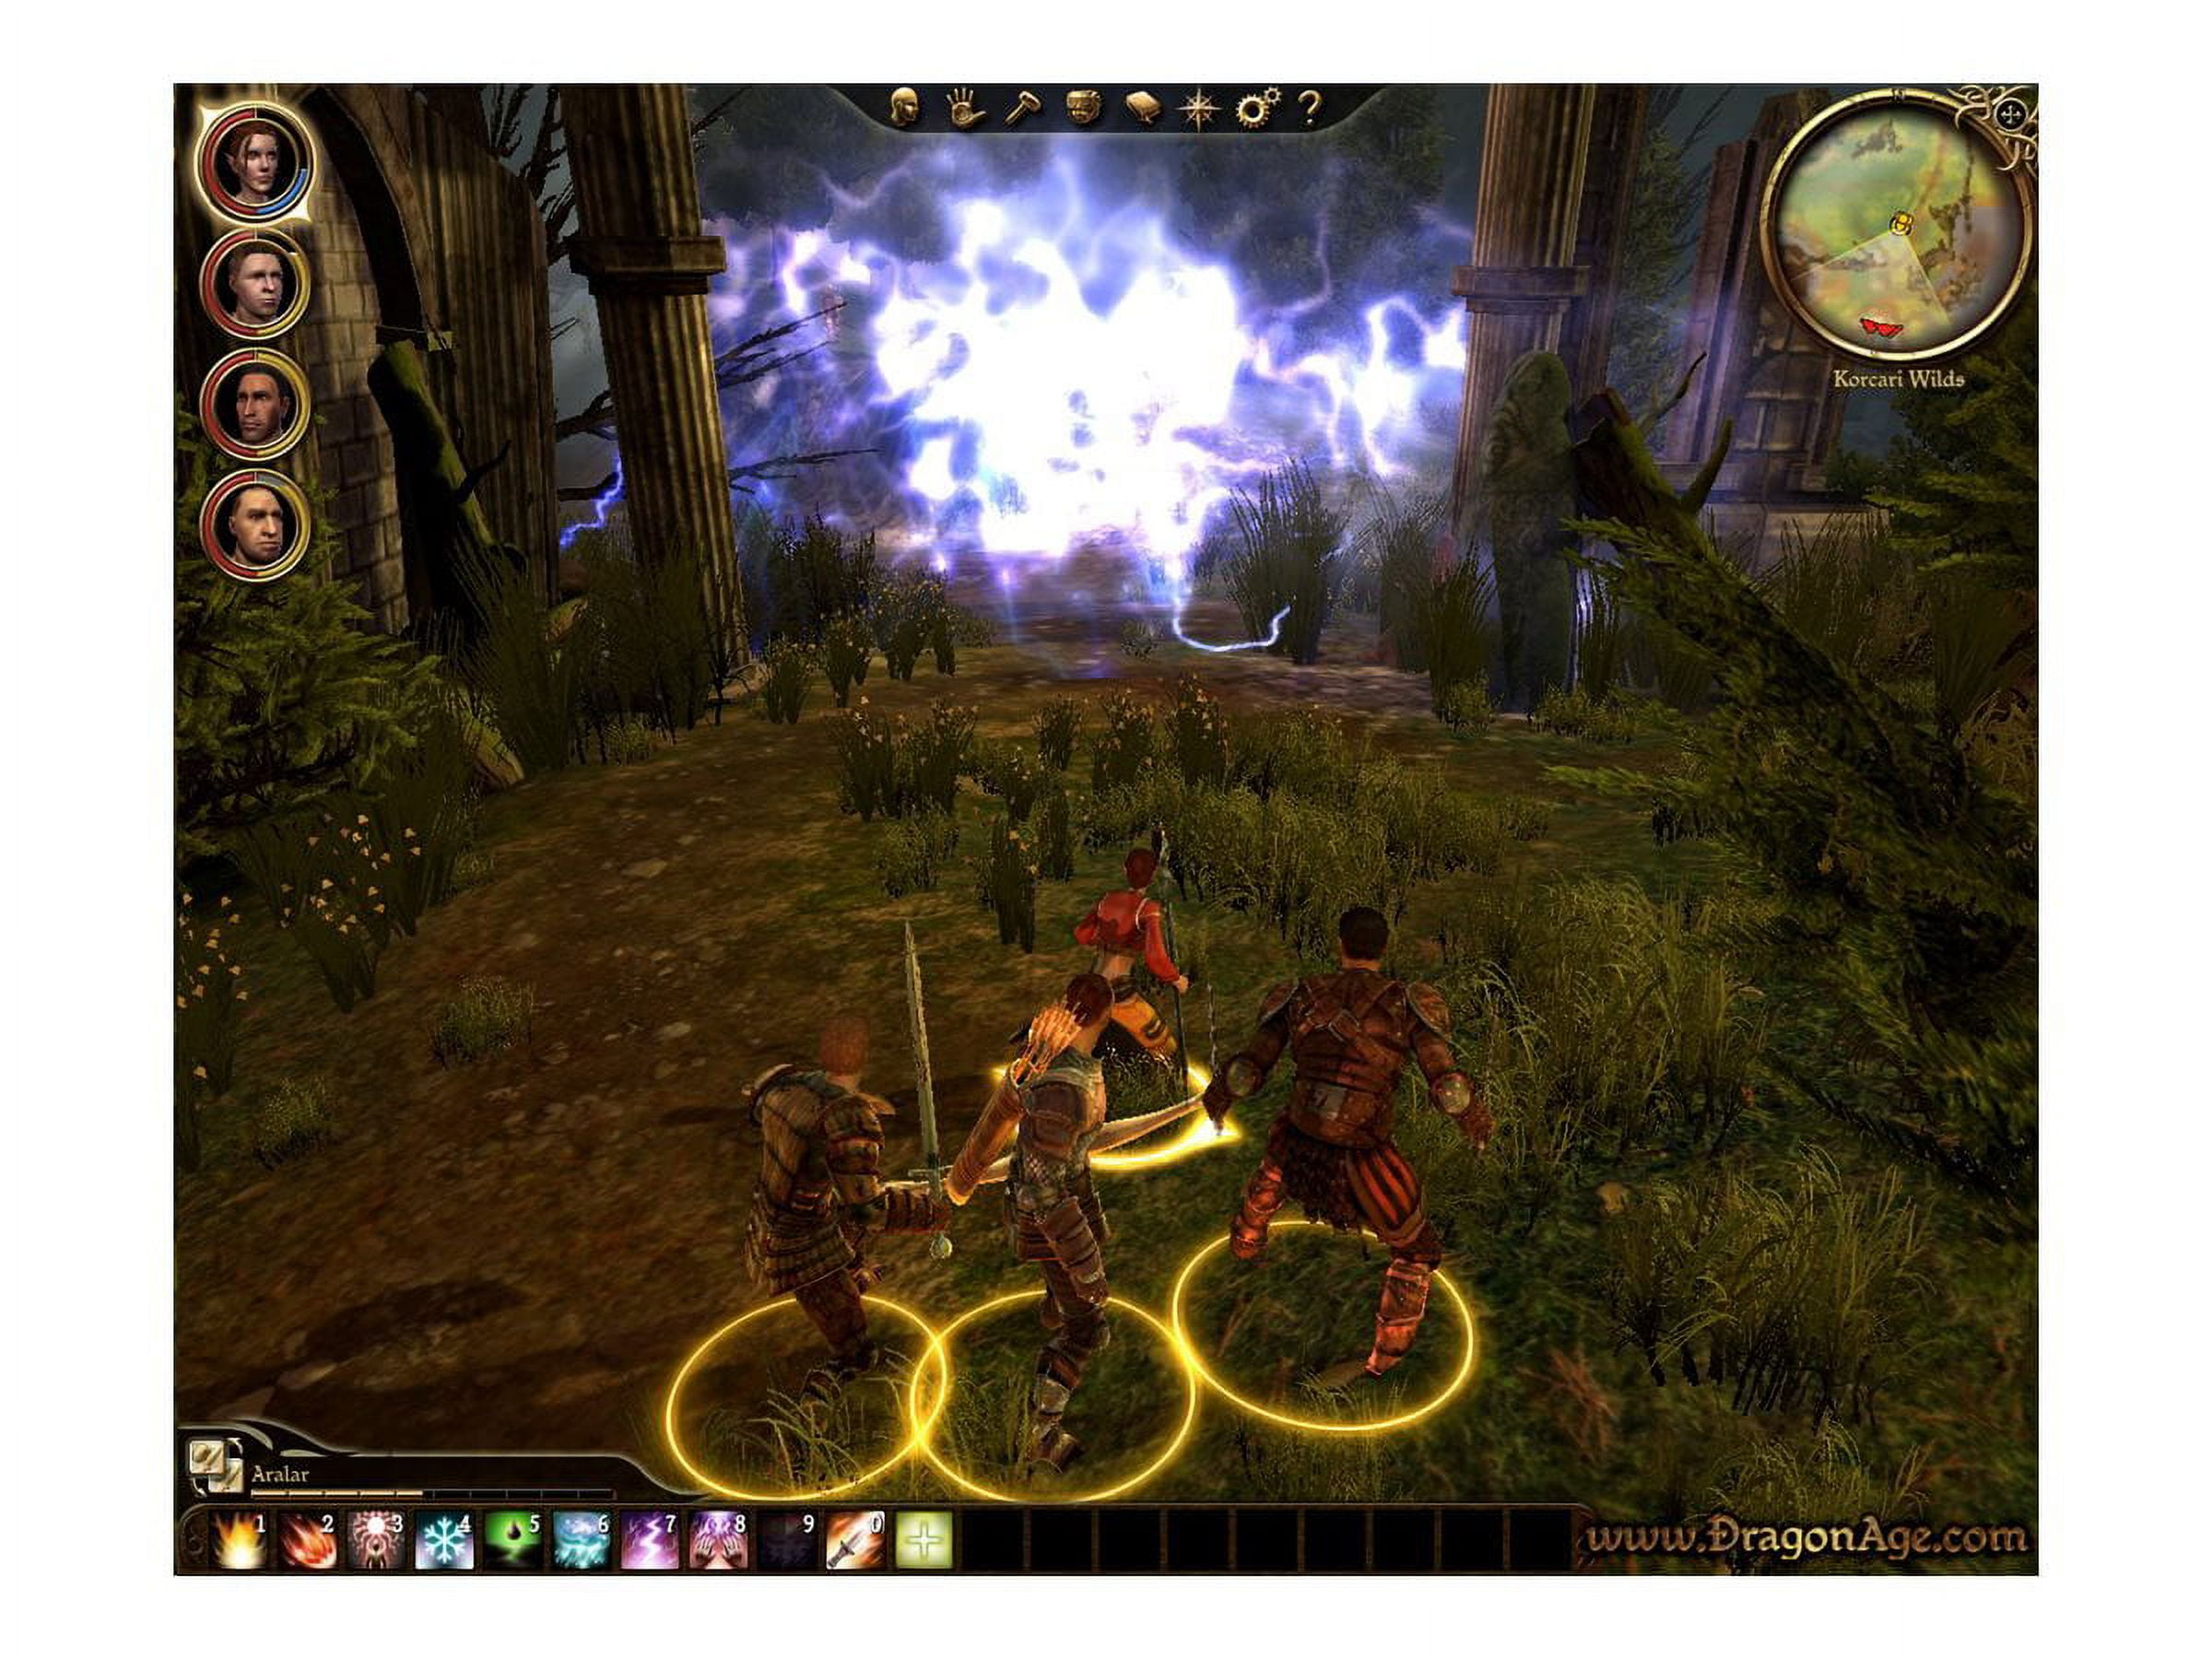 How to Get Dragon Age: Origins to Work Well on PC